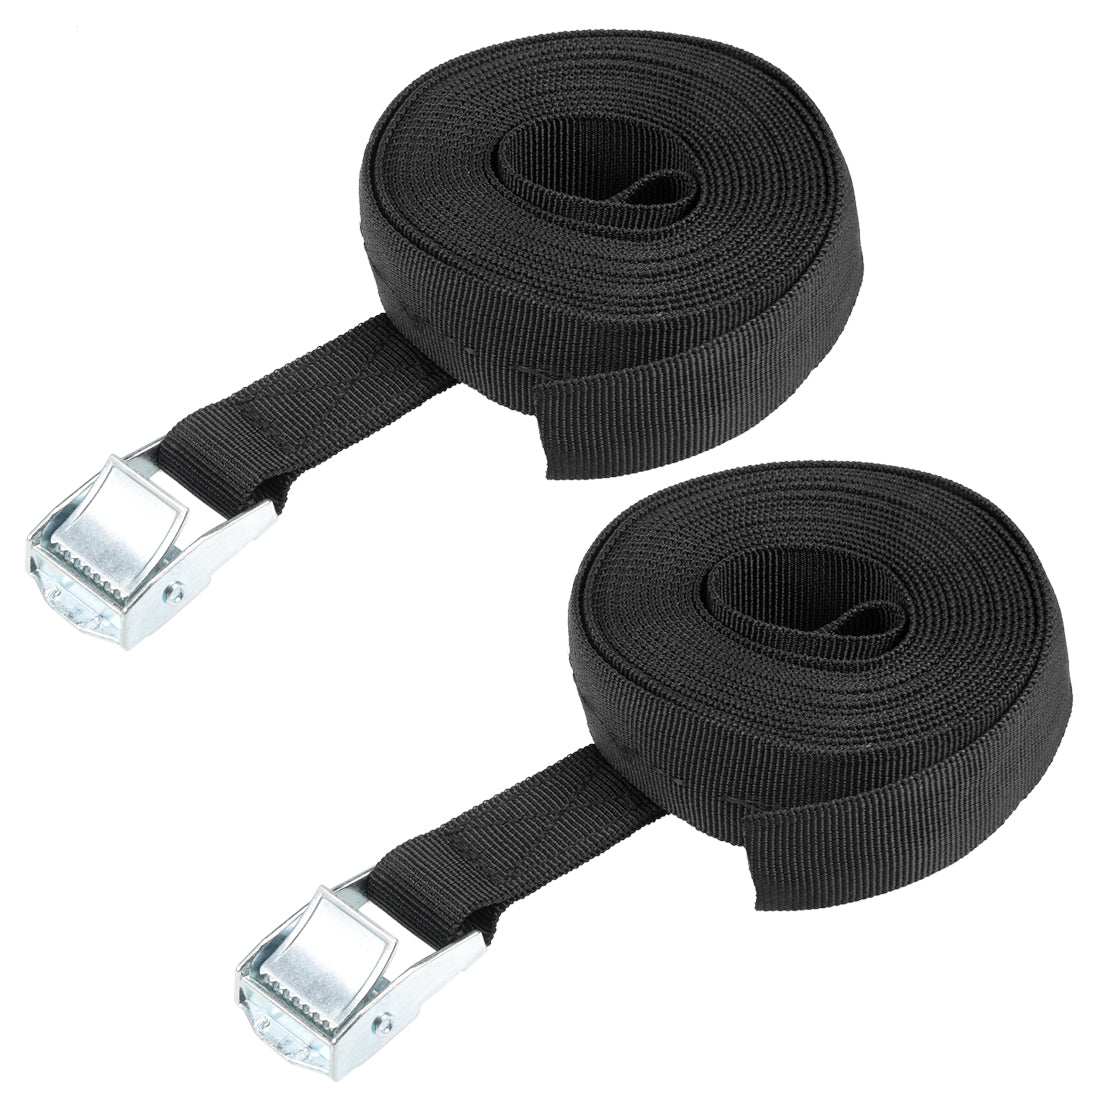 uxcell Uxcell 4M x 25mm Lashing Strap Cargo Tie Down Straps Buckle Up to 80Kg, Black, 2Pcs